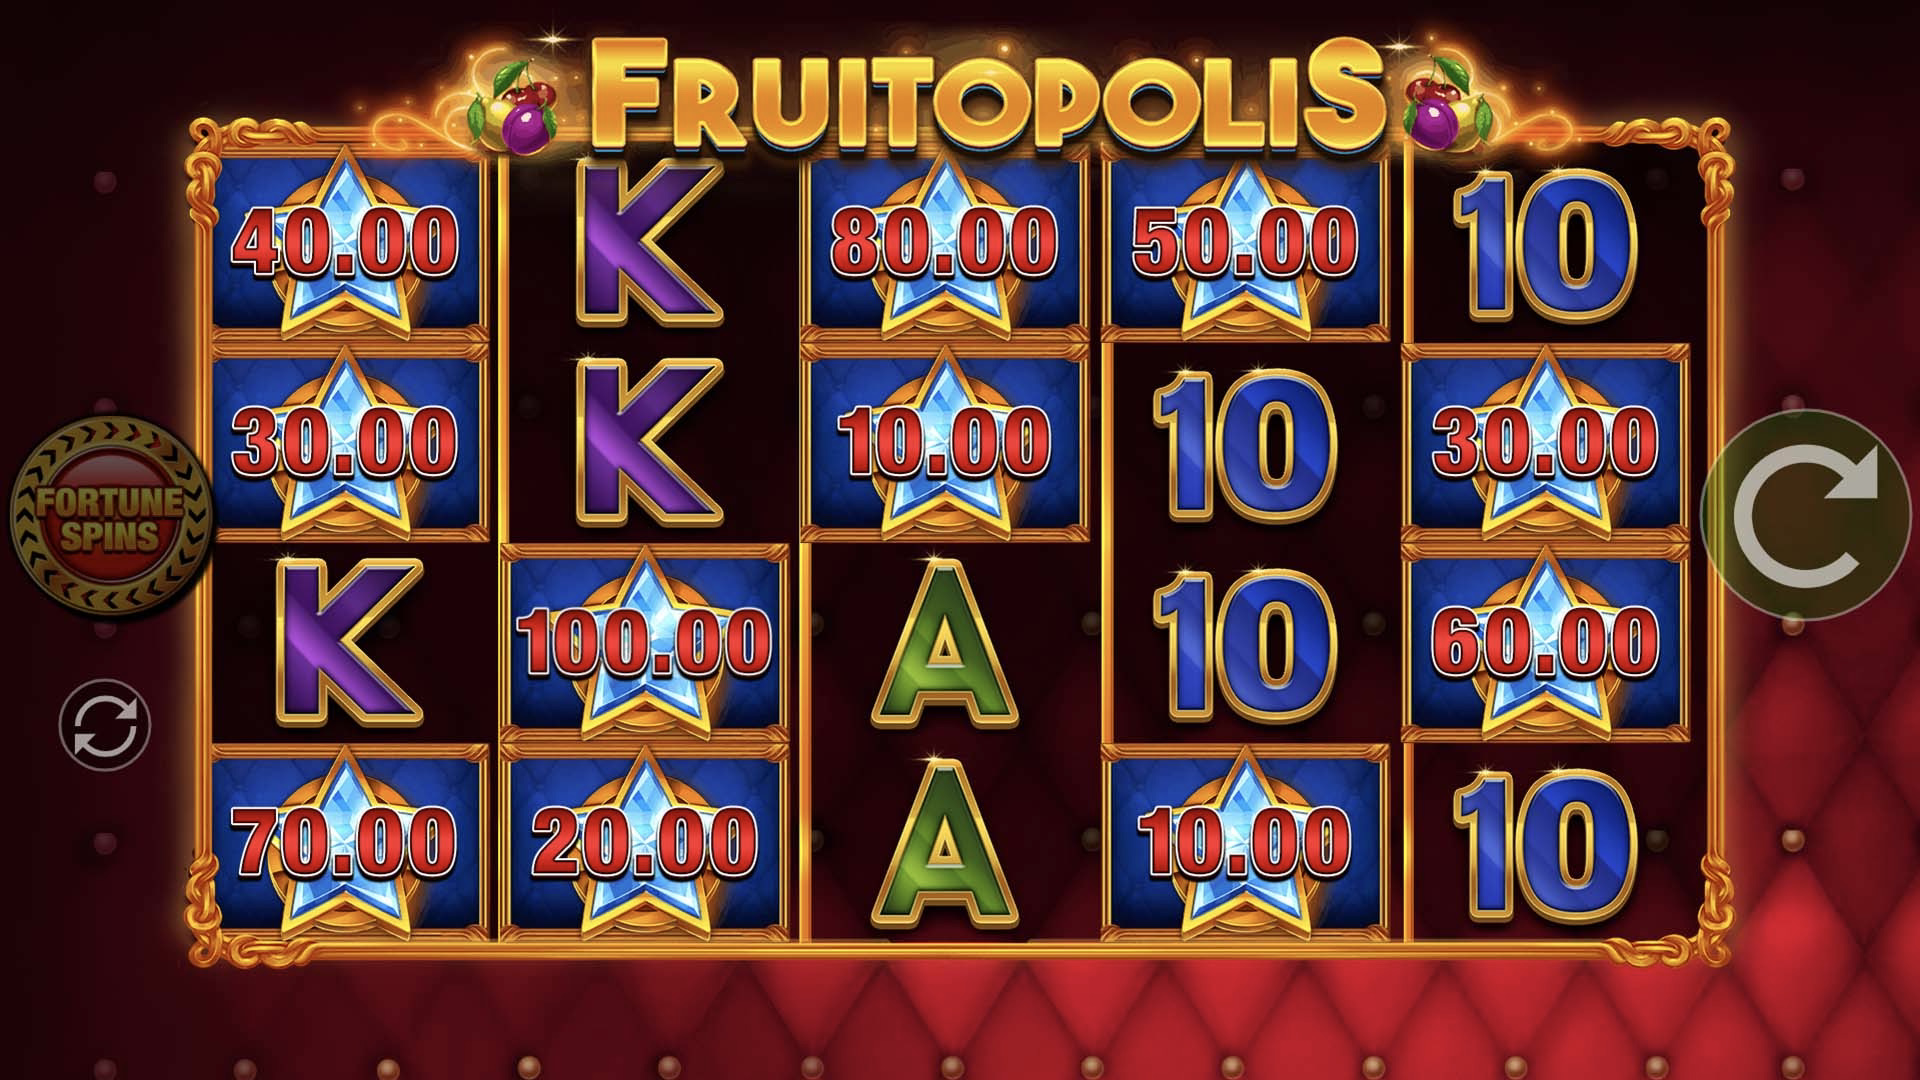 Fruitopolis Fortune Play is a 5x4, 20-payline video slot that incorporates a maximum win potential of up to x50,000 the bet.